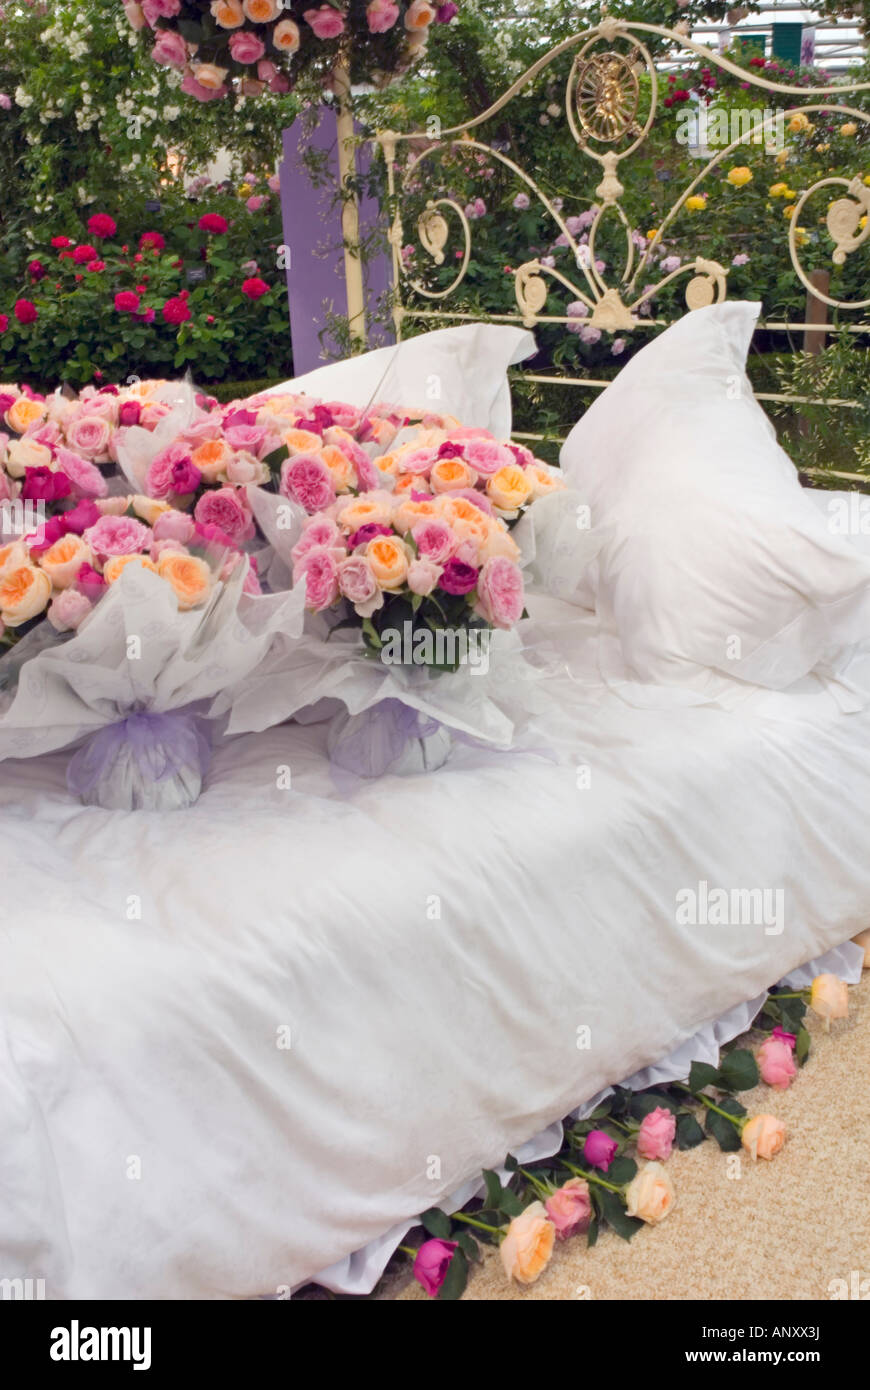 A bed of roses! Cut roses adorn an actual real freshly made bed in the garden setting inviting romance and romantic thoughts Stock Photo